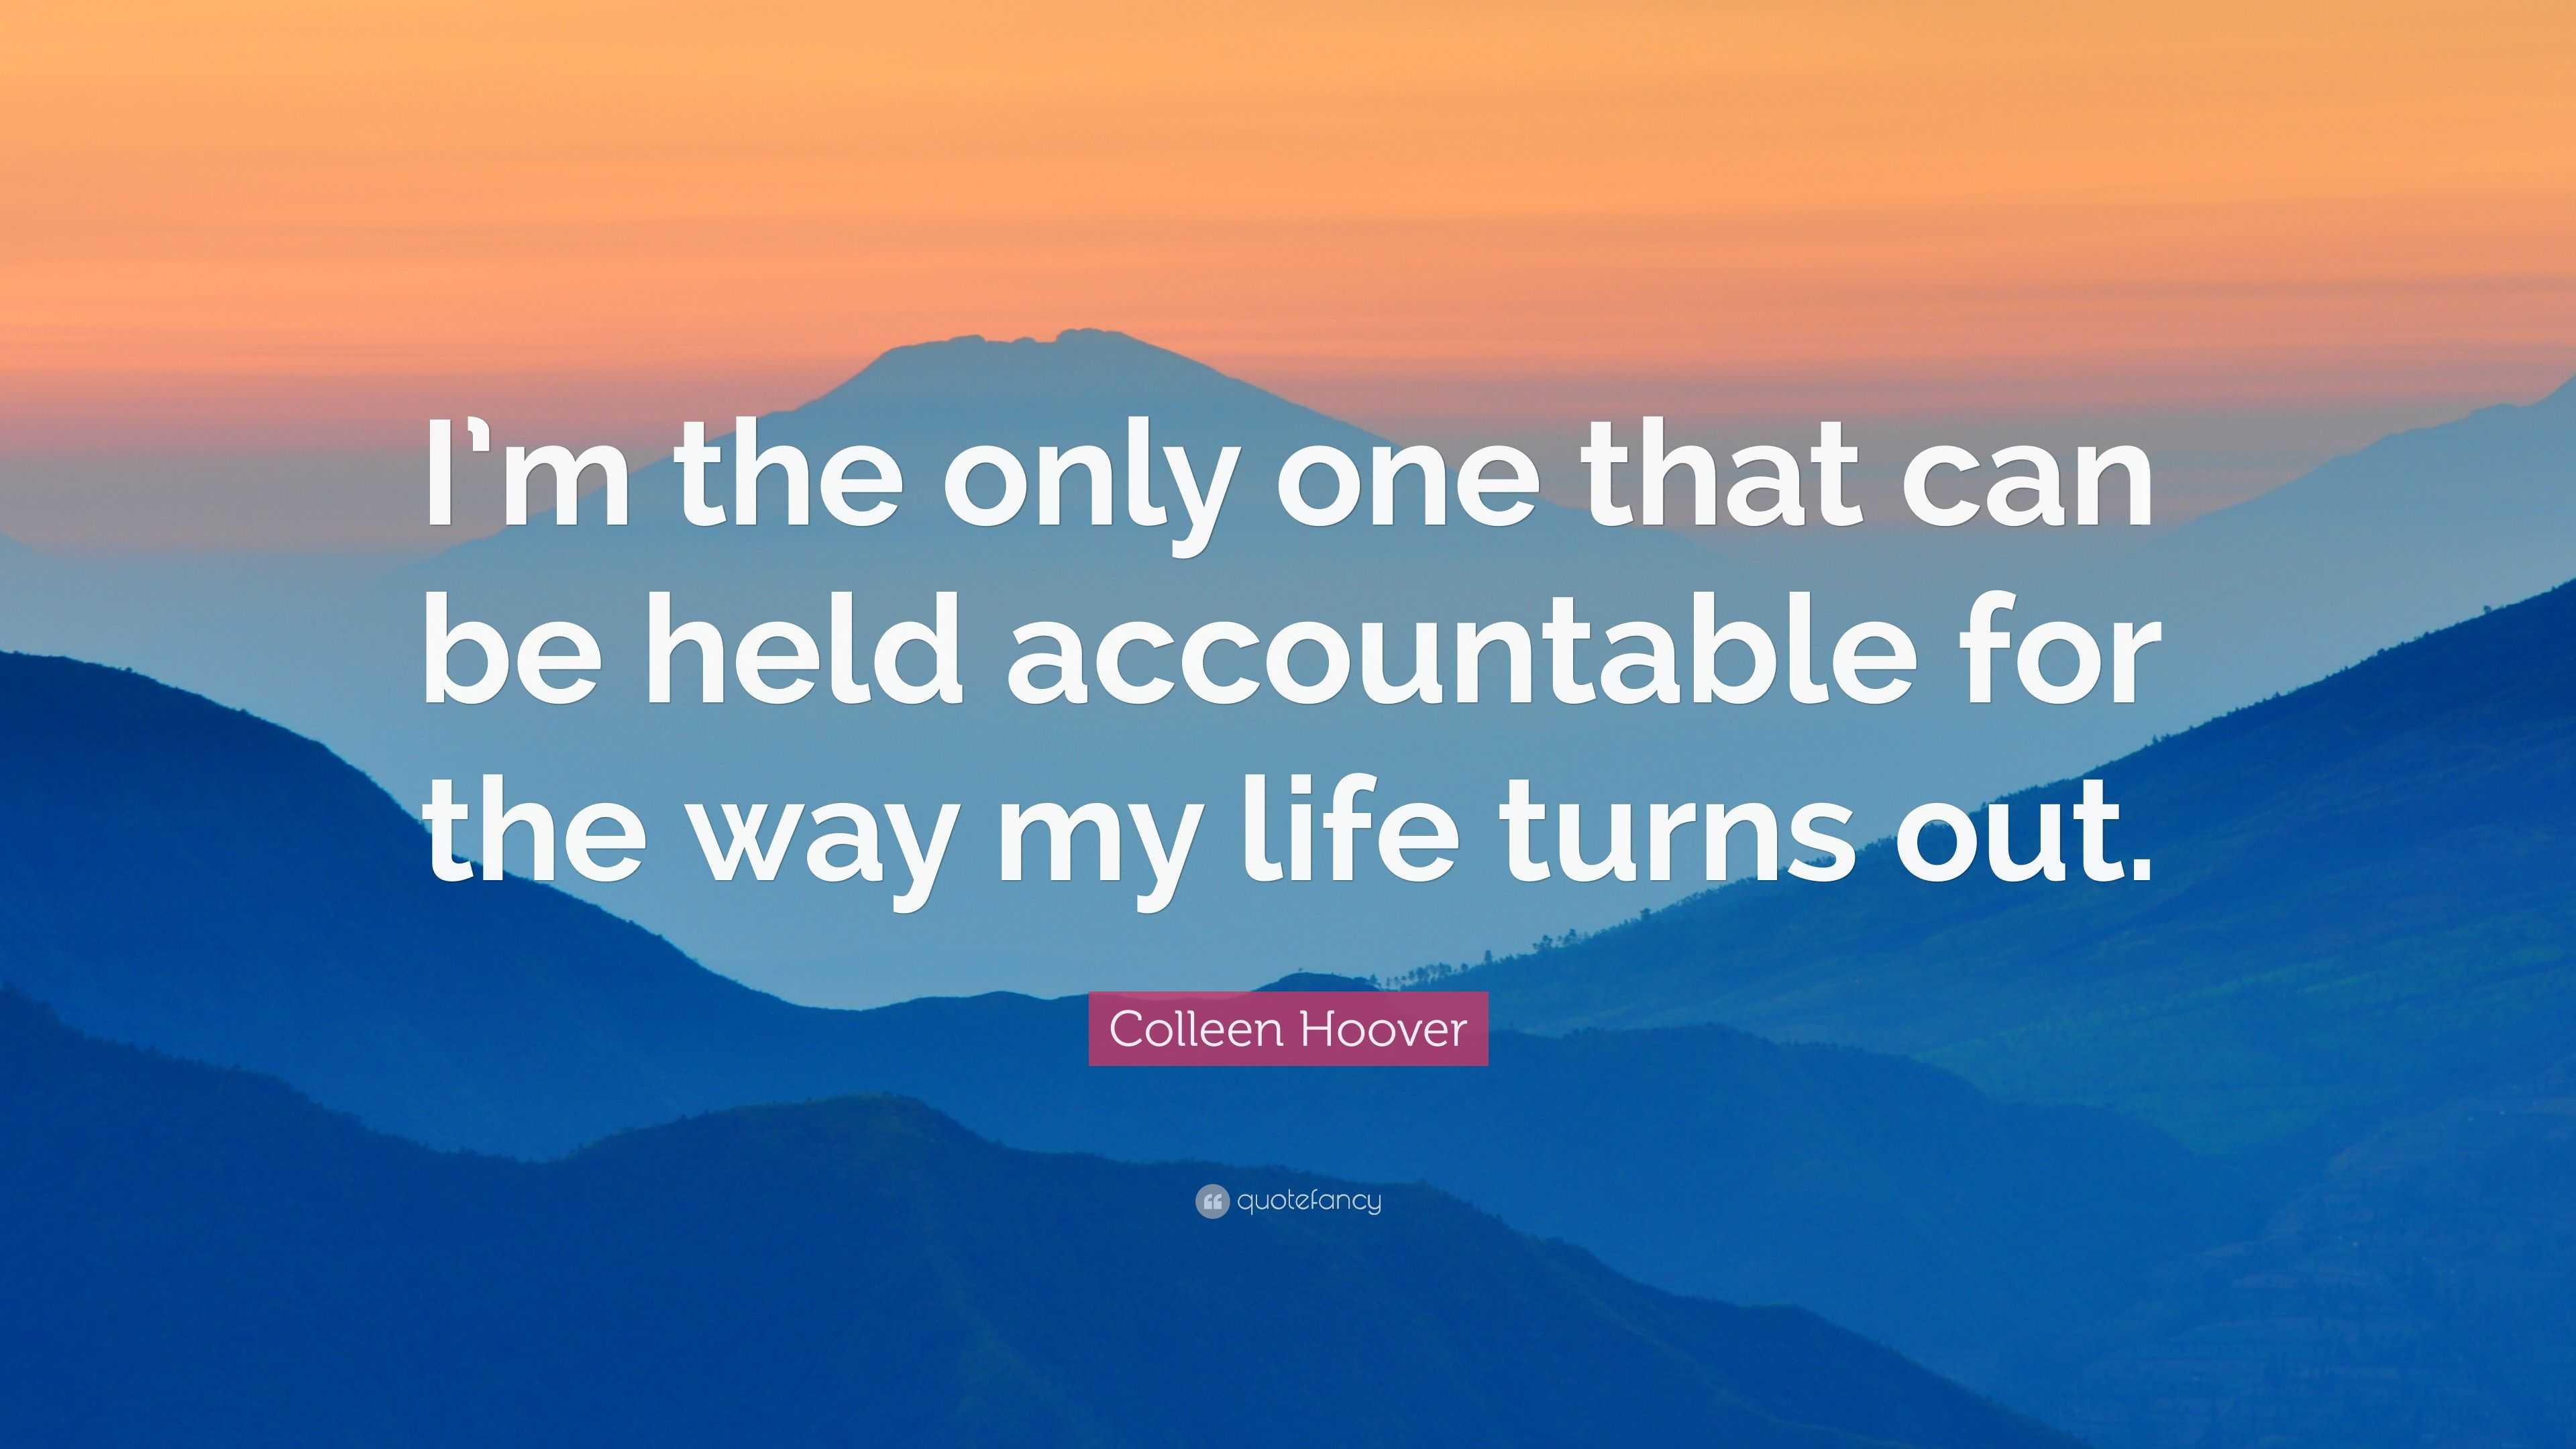 Colleen Hoover Quote: “I’m the only one that can be held accountable ...